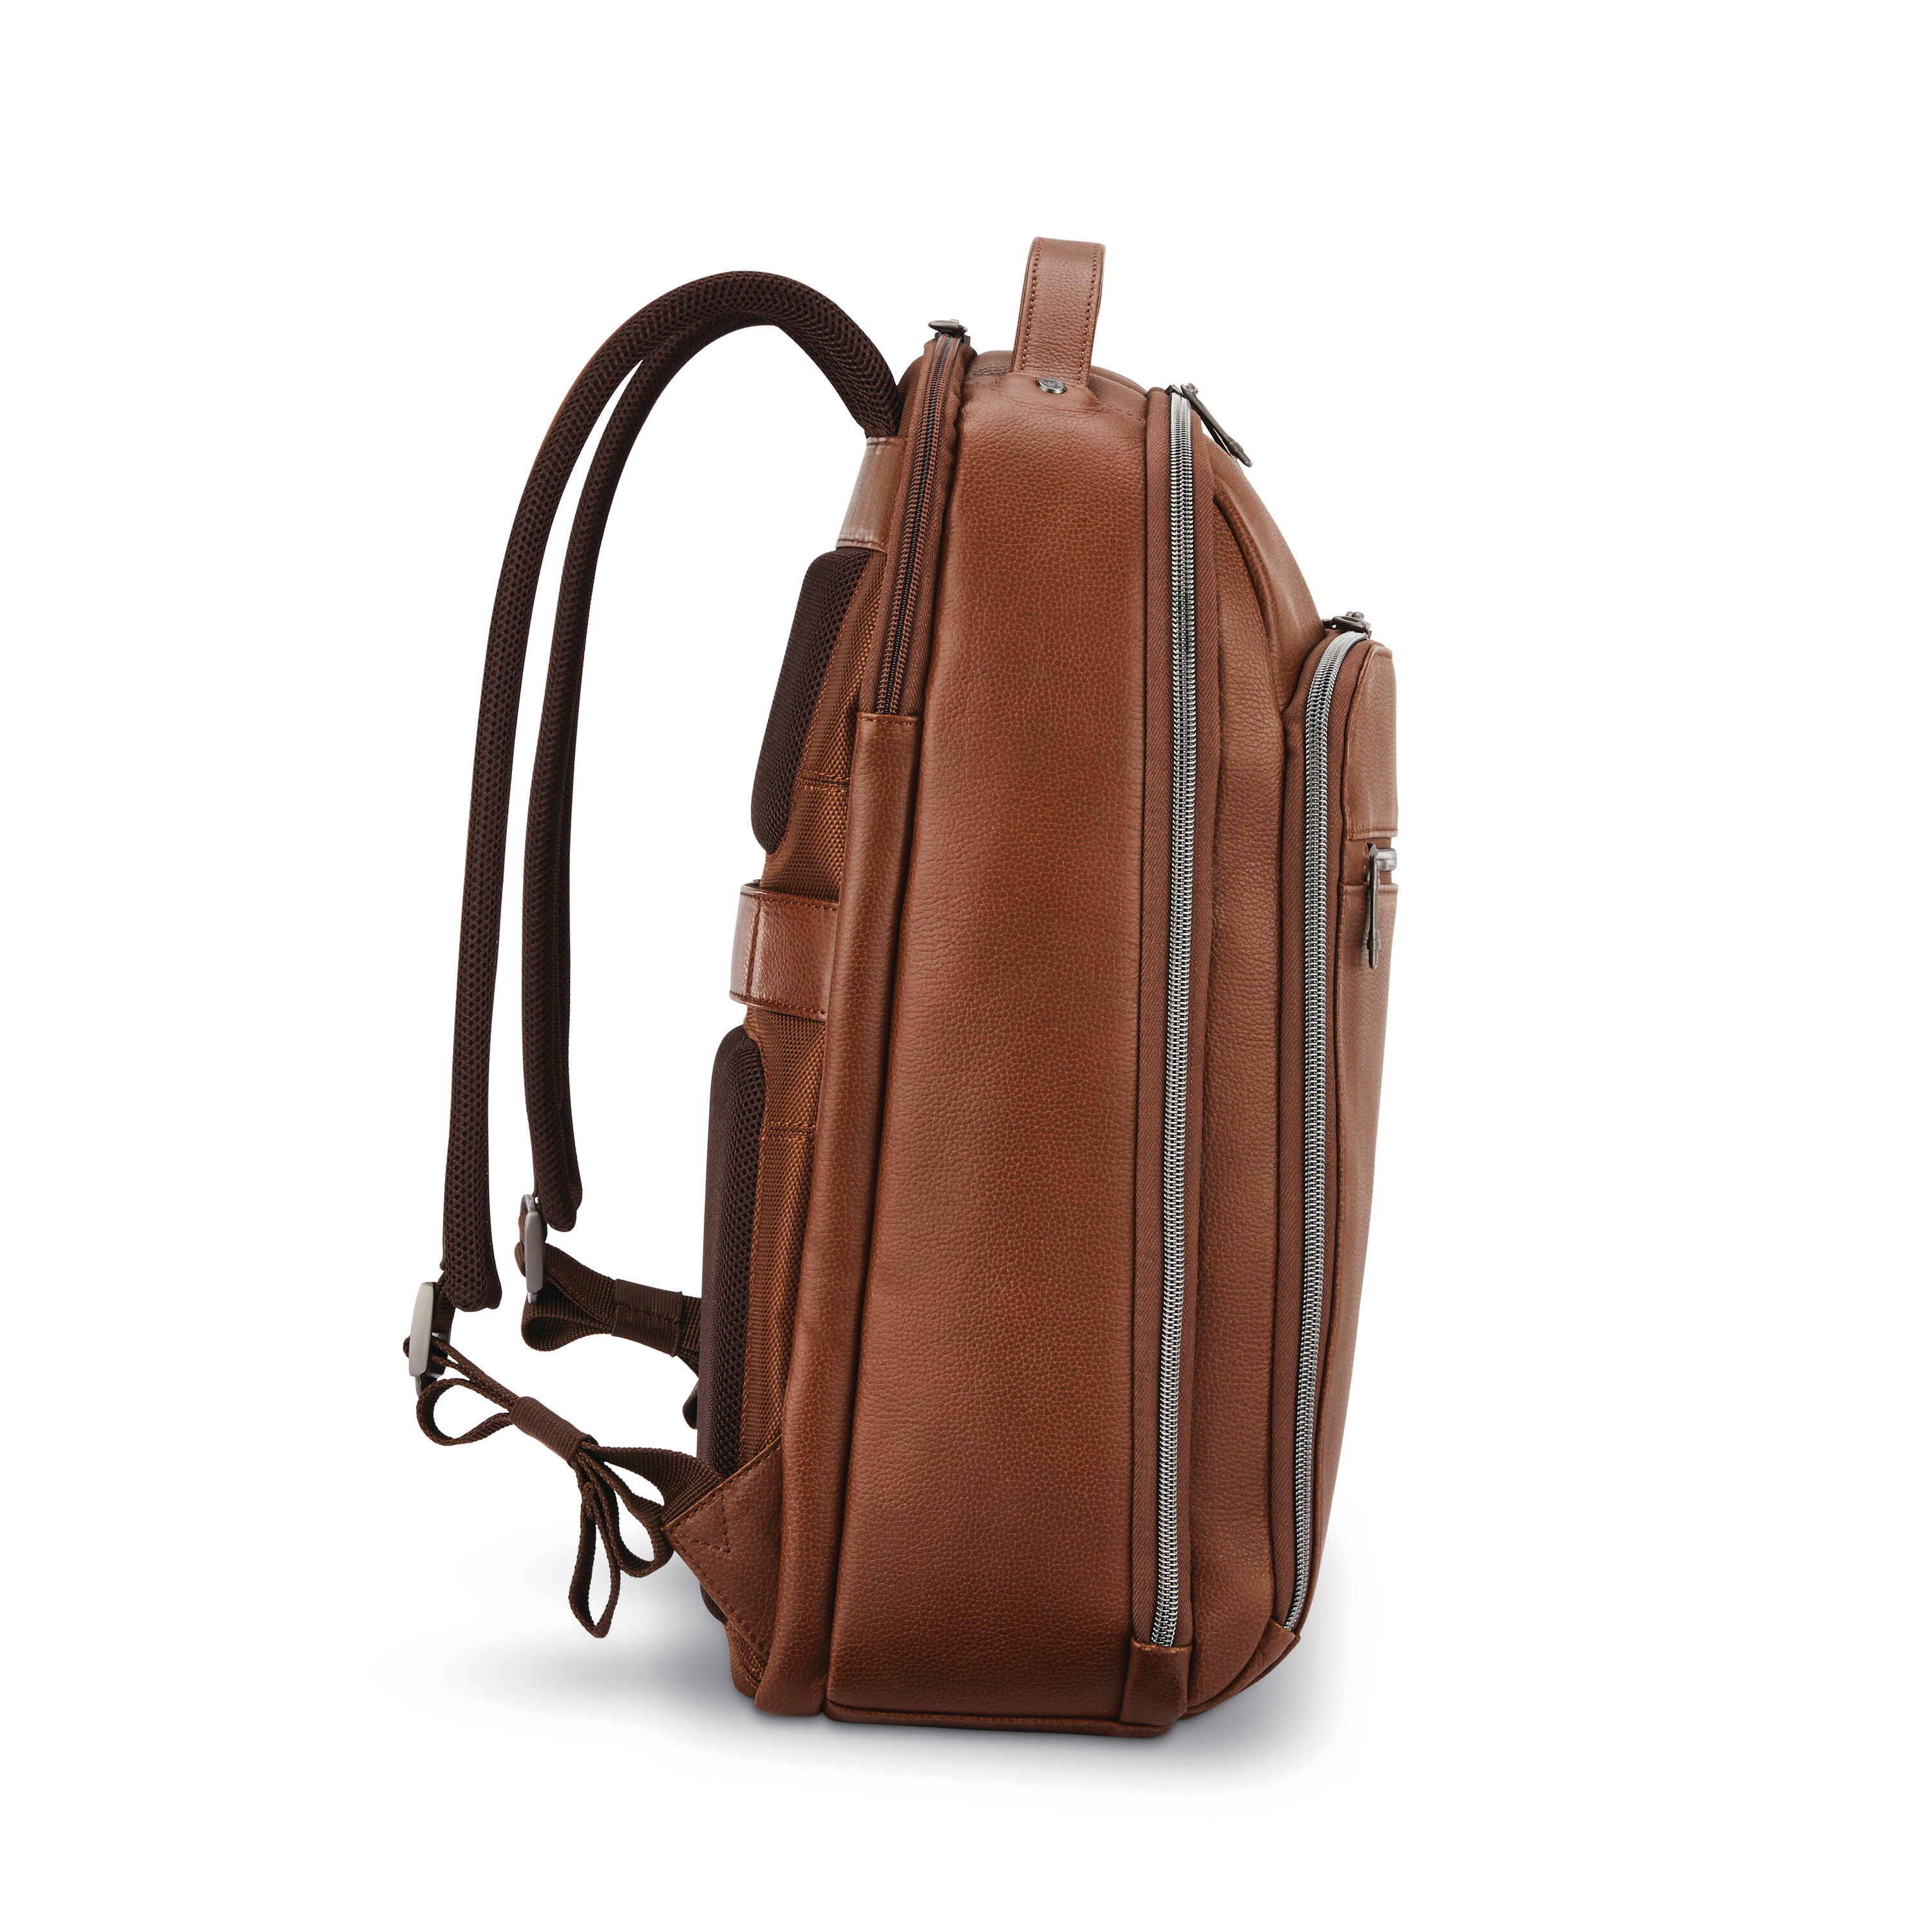 Classic Leather Backpack, Laptop Backpack